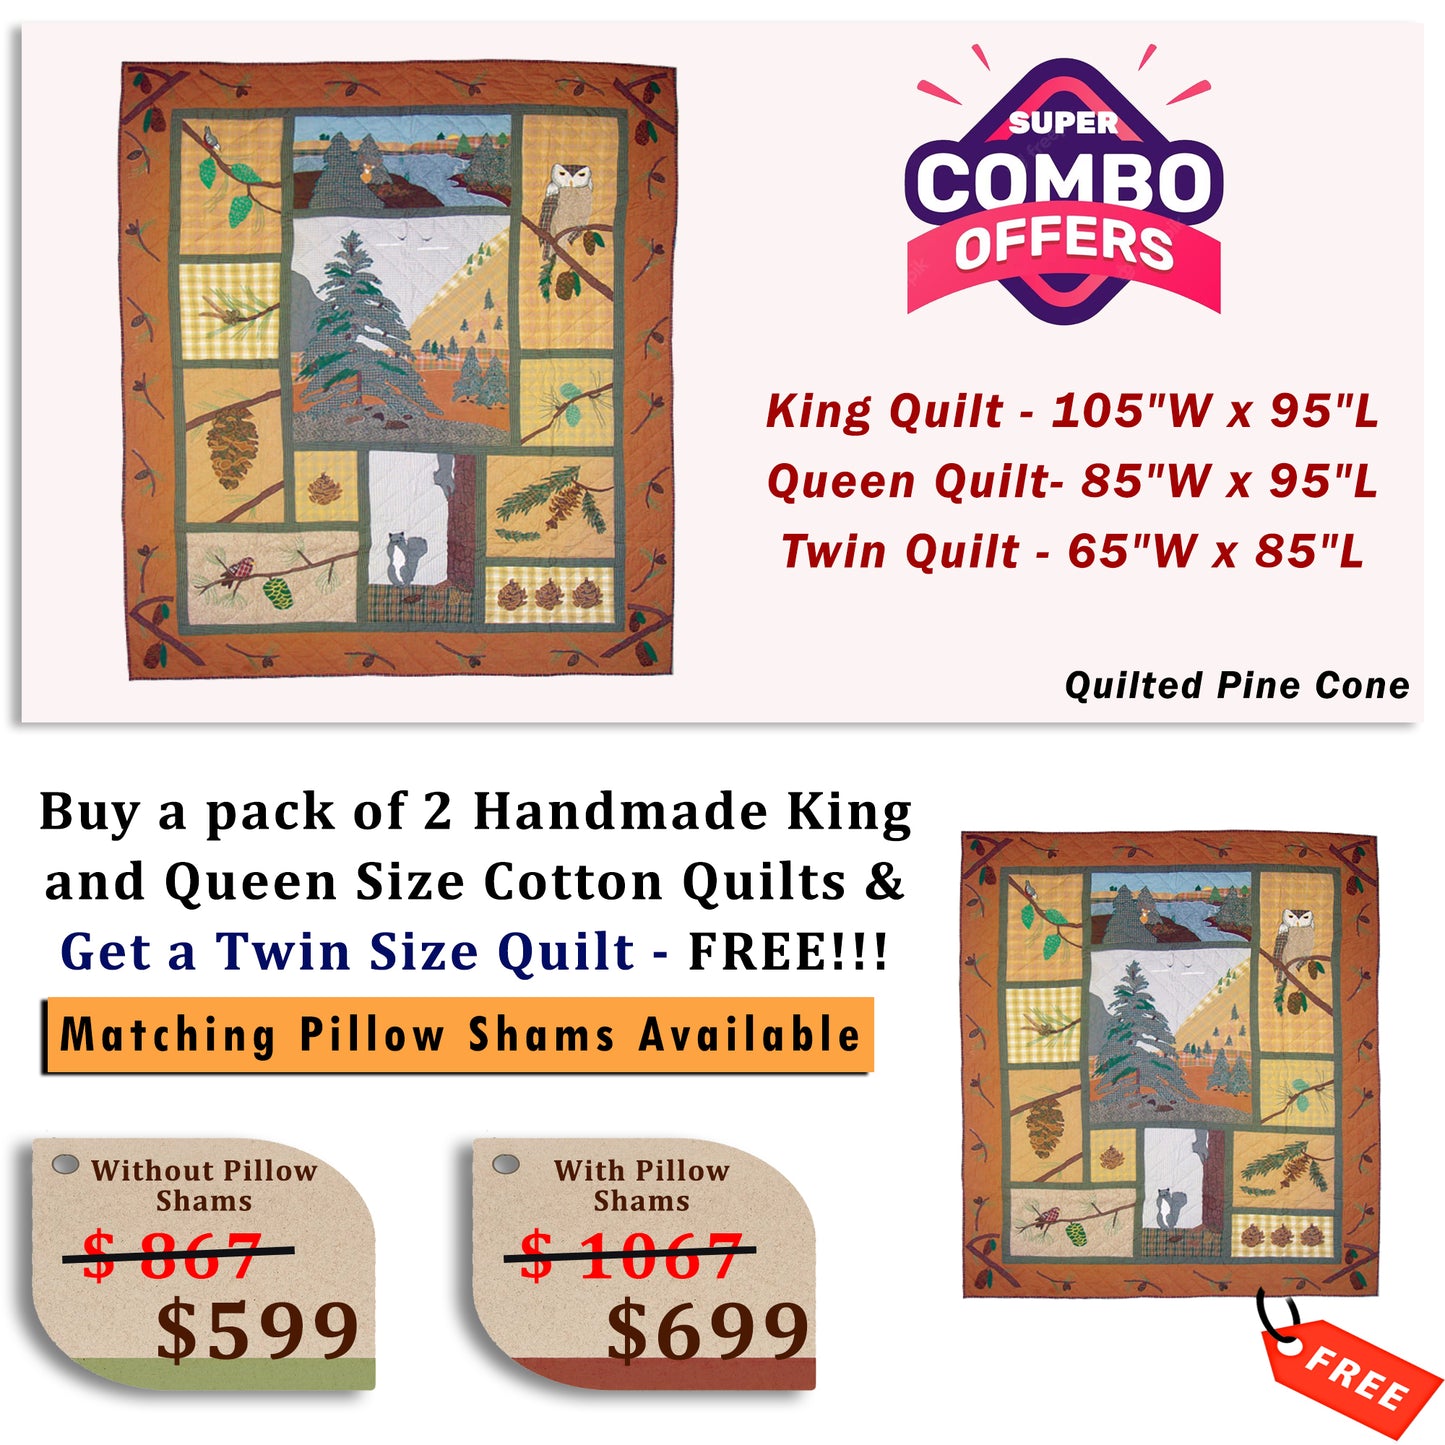 Pine Cone - Buy a pack of King and Queen Size Quilt, and get a Twin Size Quilt FREE!!!